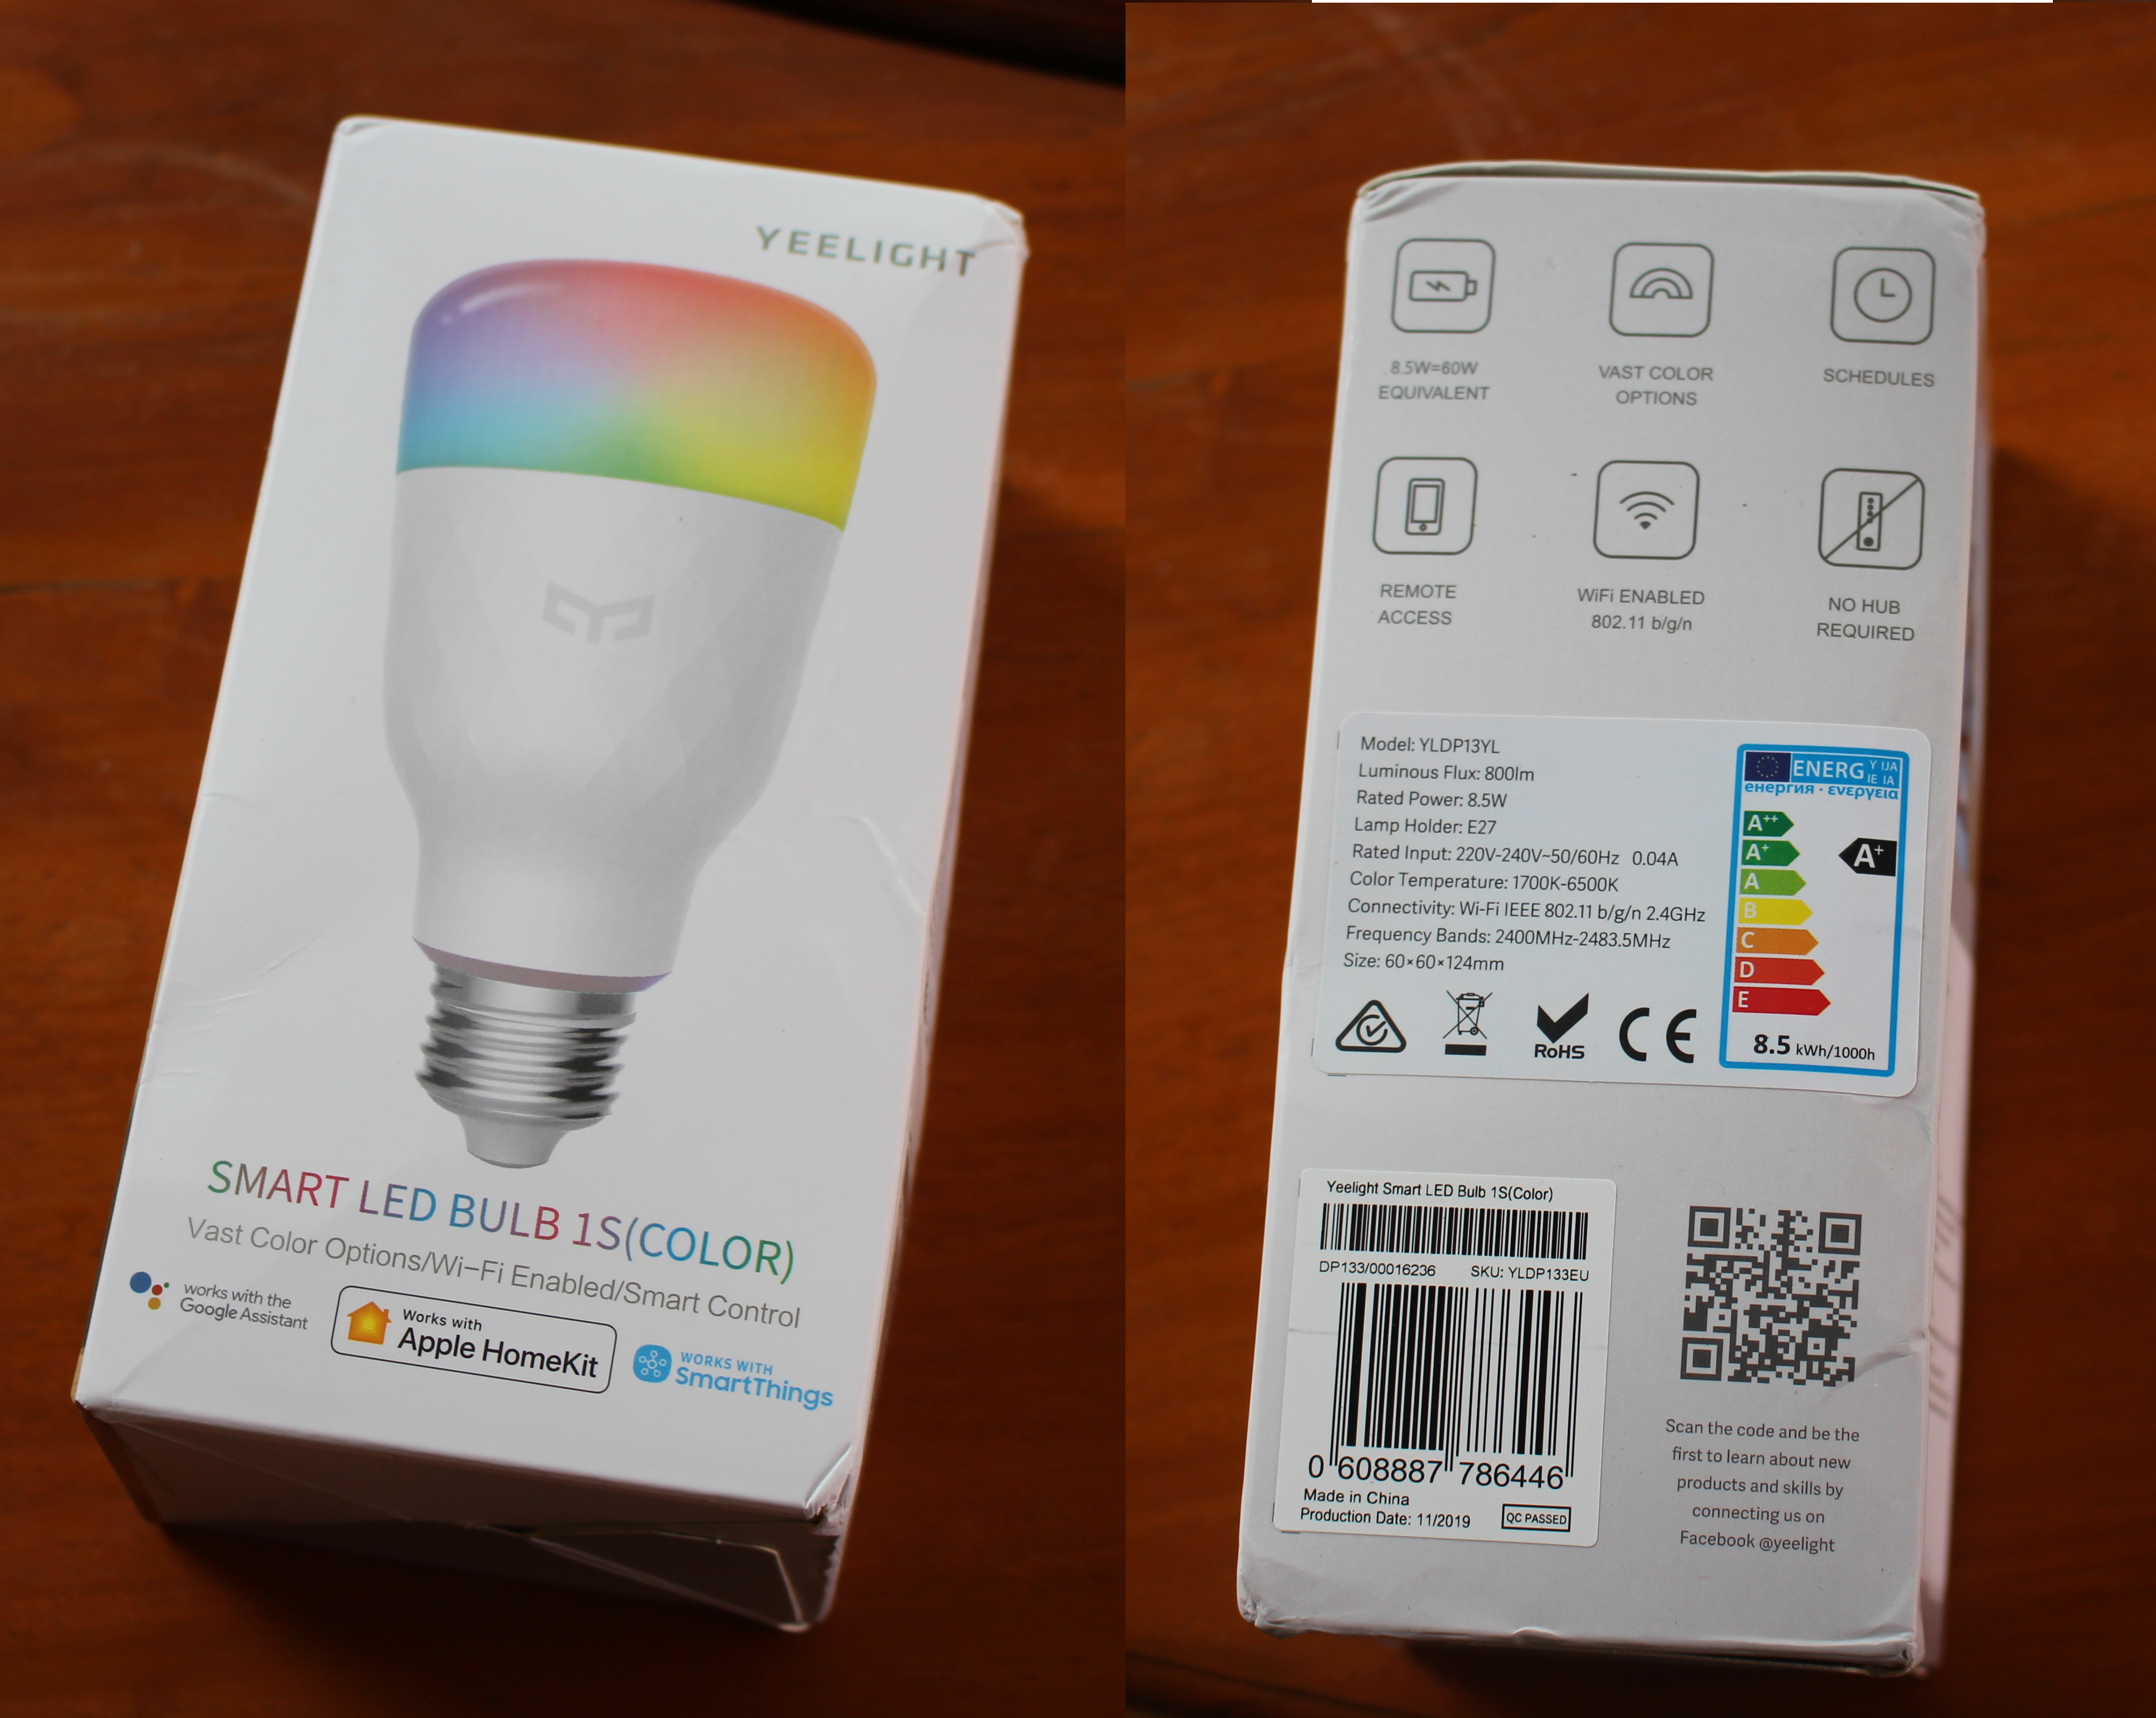 Yeelight Smart LED Bulb 1S (Color) Review with Android App and